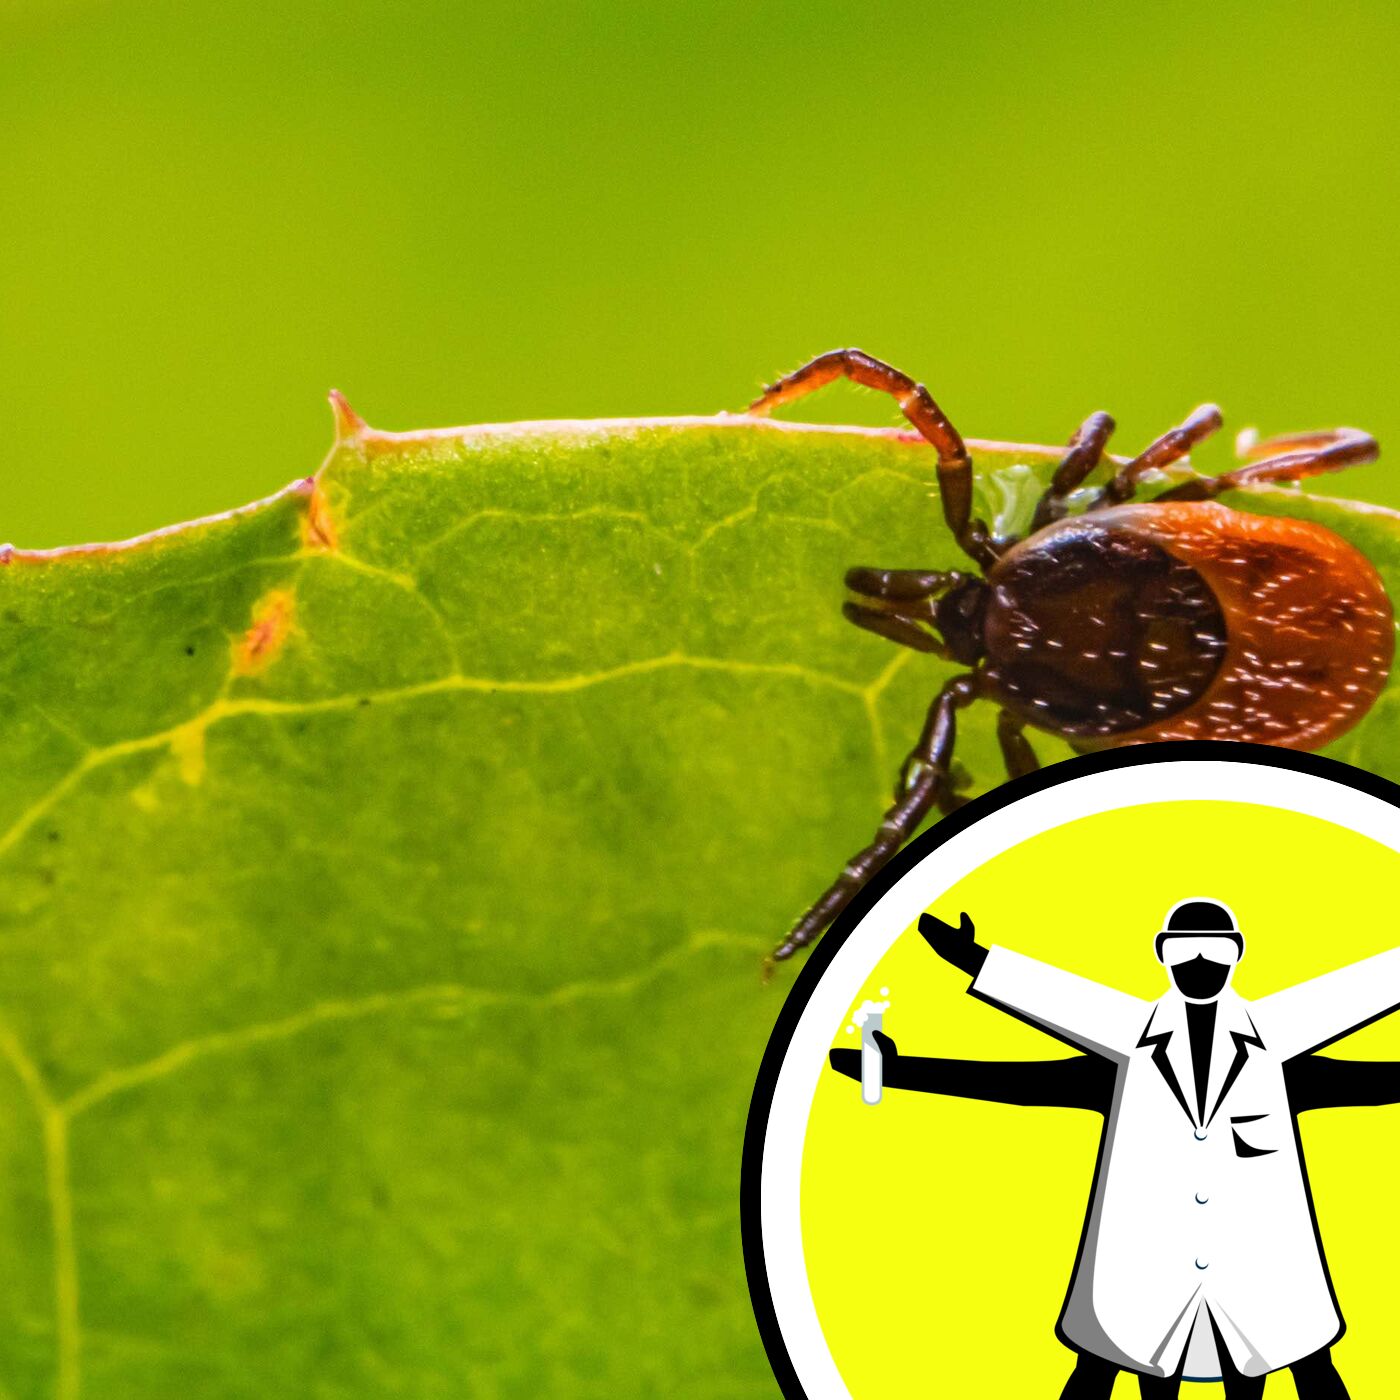 Tackling the uptick in ticks